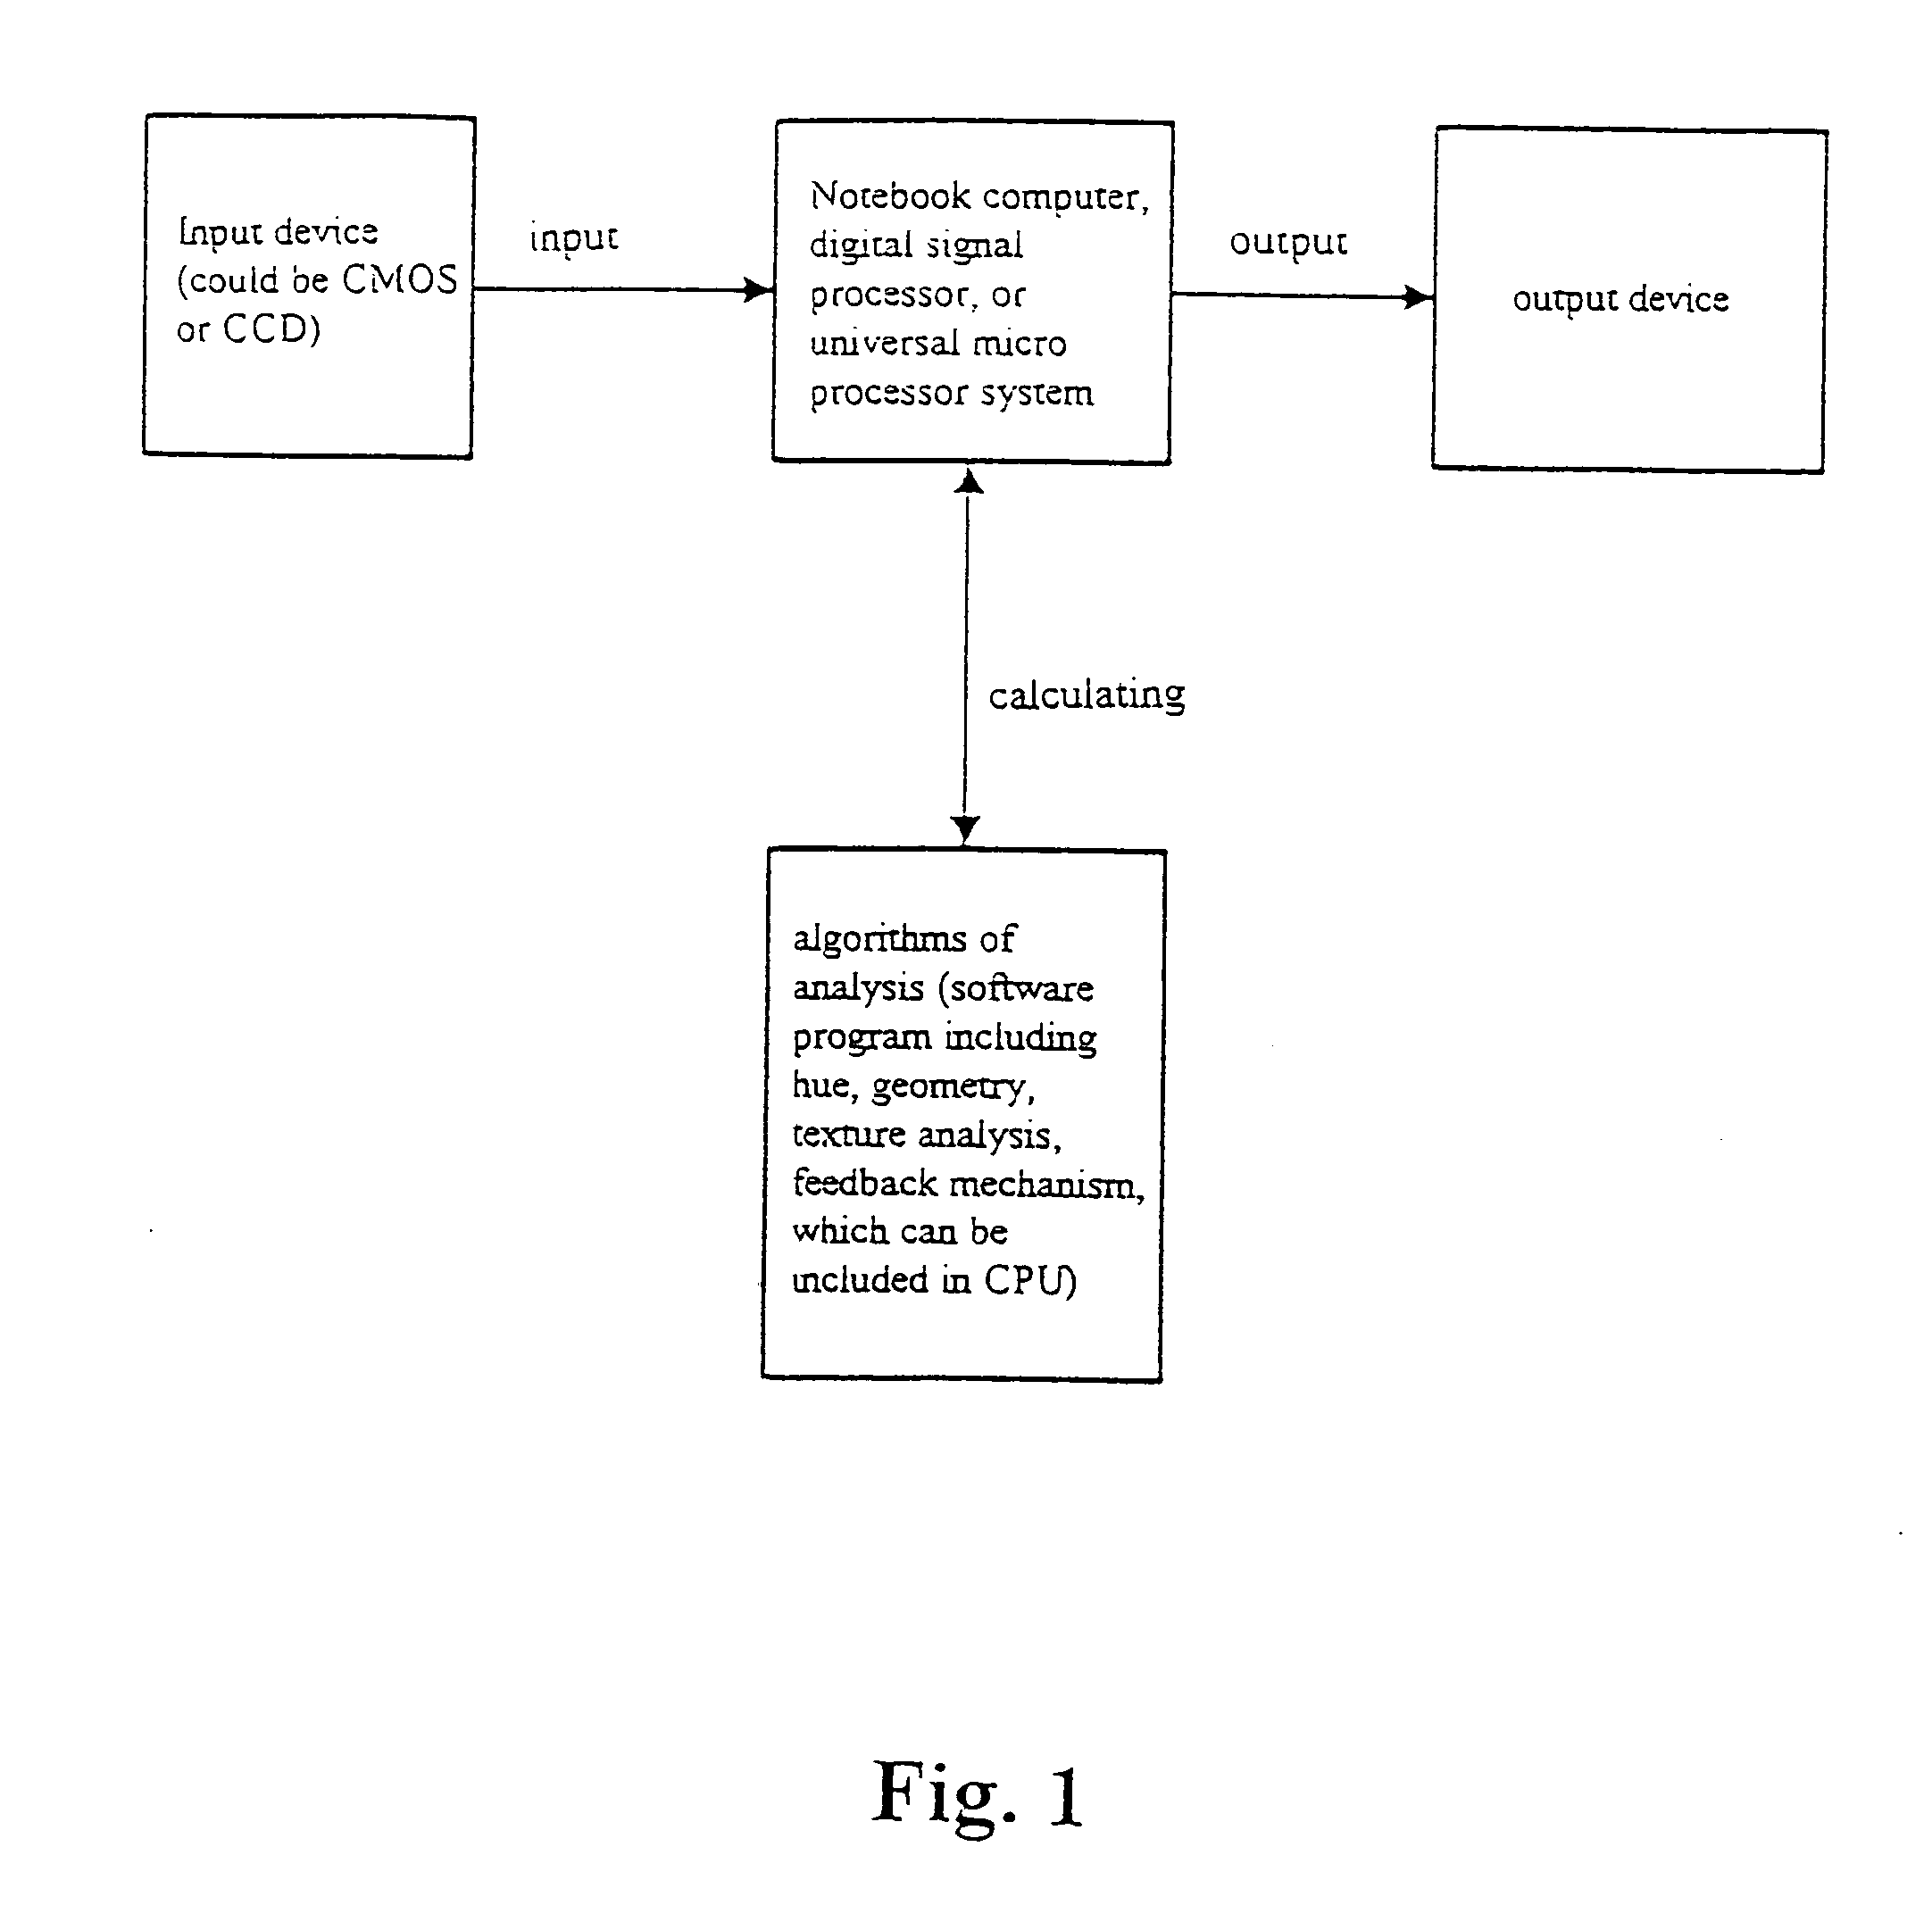 Apparatus and method for identifying surrounding environment by means of image processing and for outputting the results